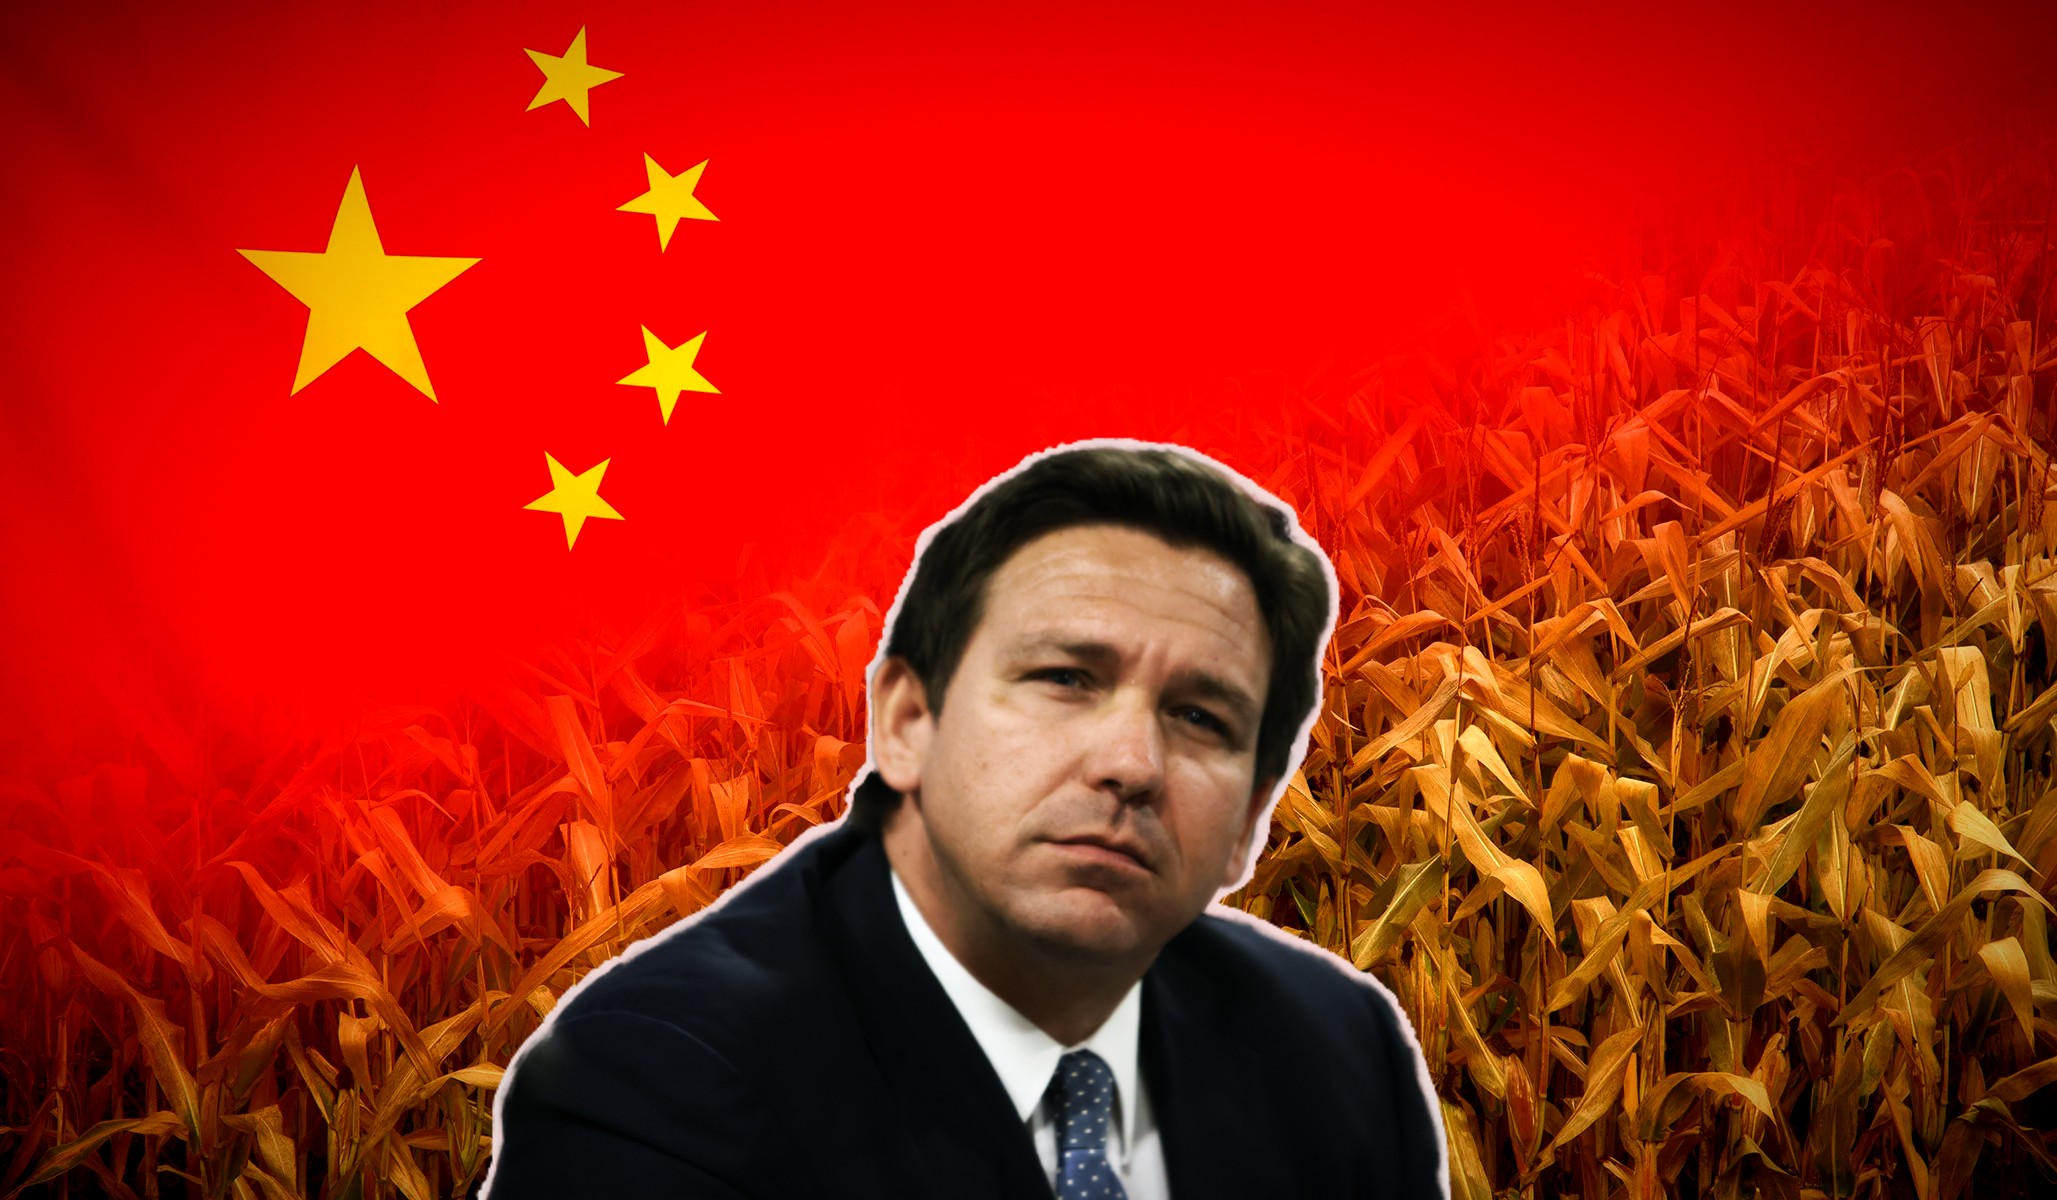 DeSantis Didn’t Support Program To Stop Chinese Land Purchases Around Bases